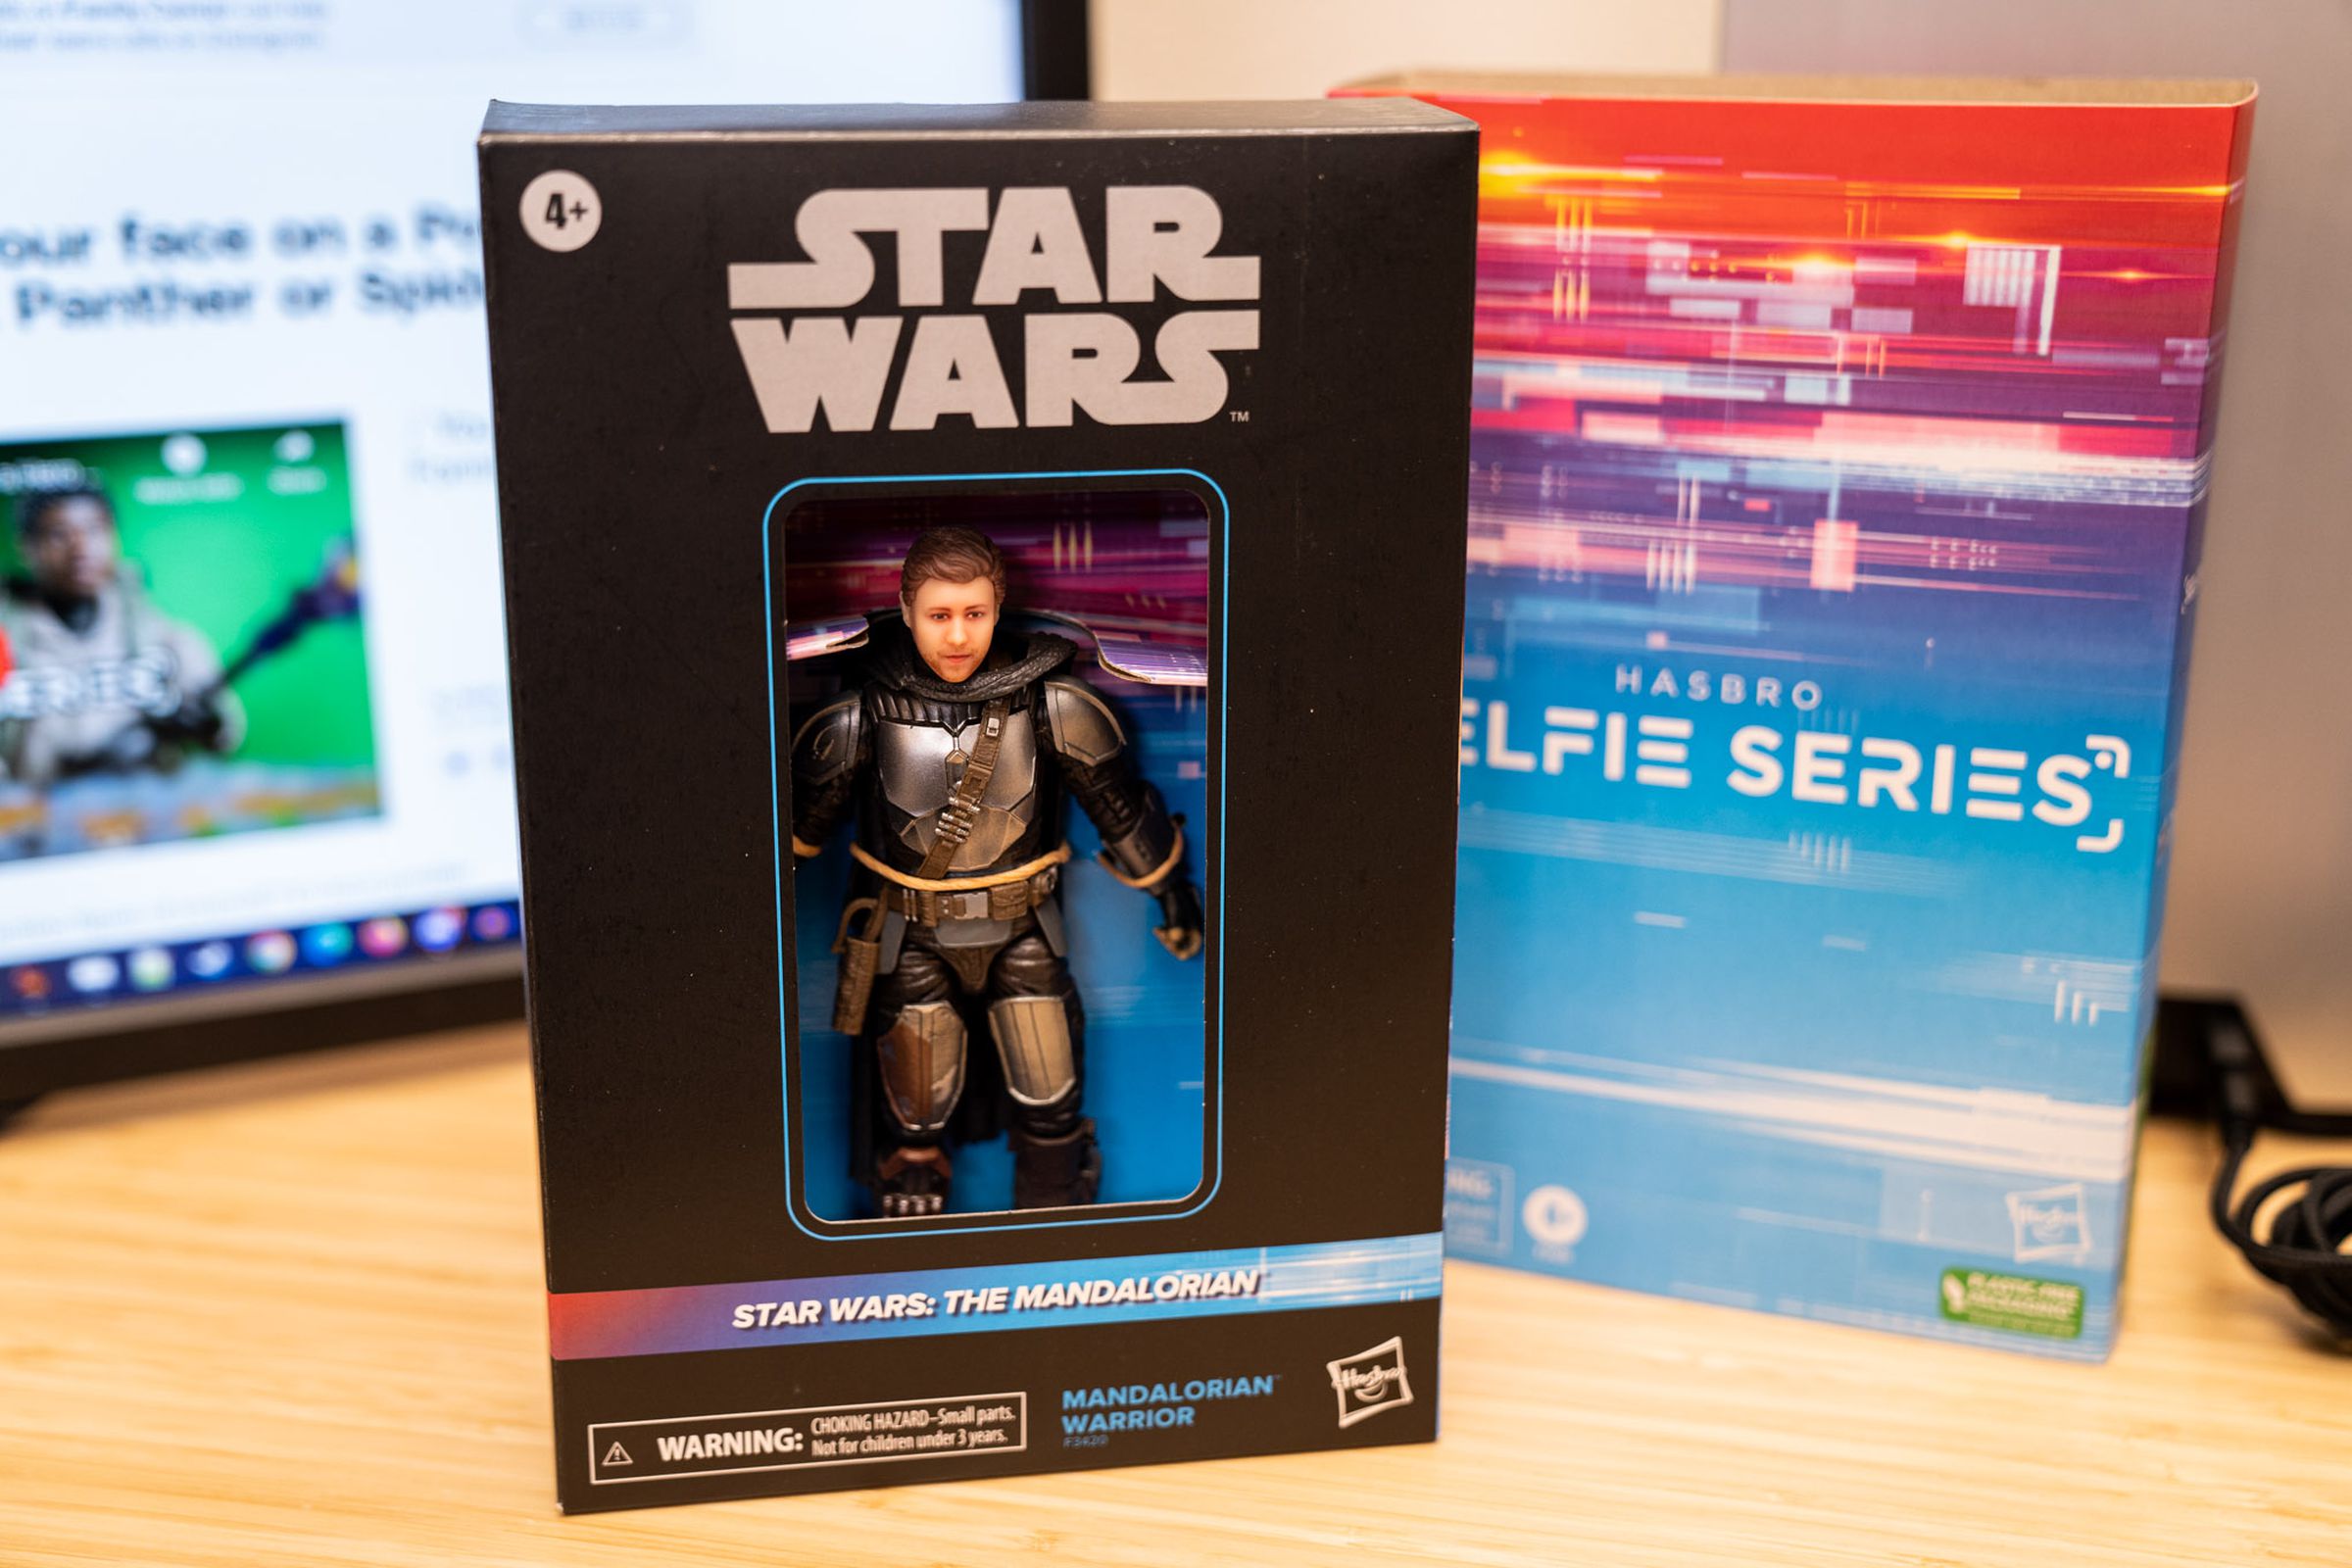 Need a last-minute gift? Hasbro made me into a Star Wars action figure